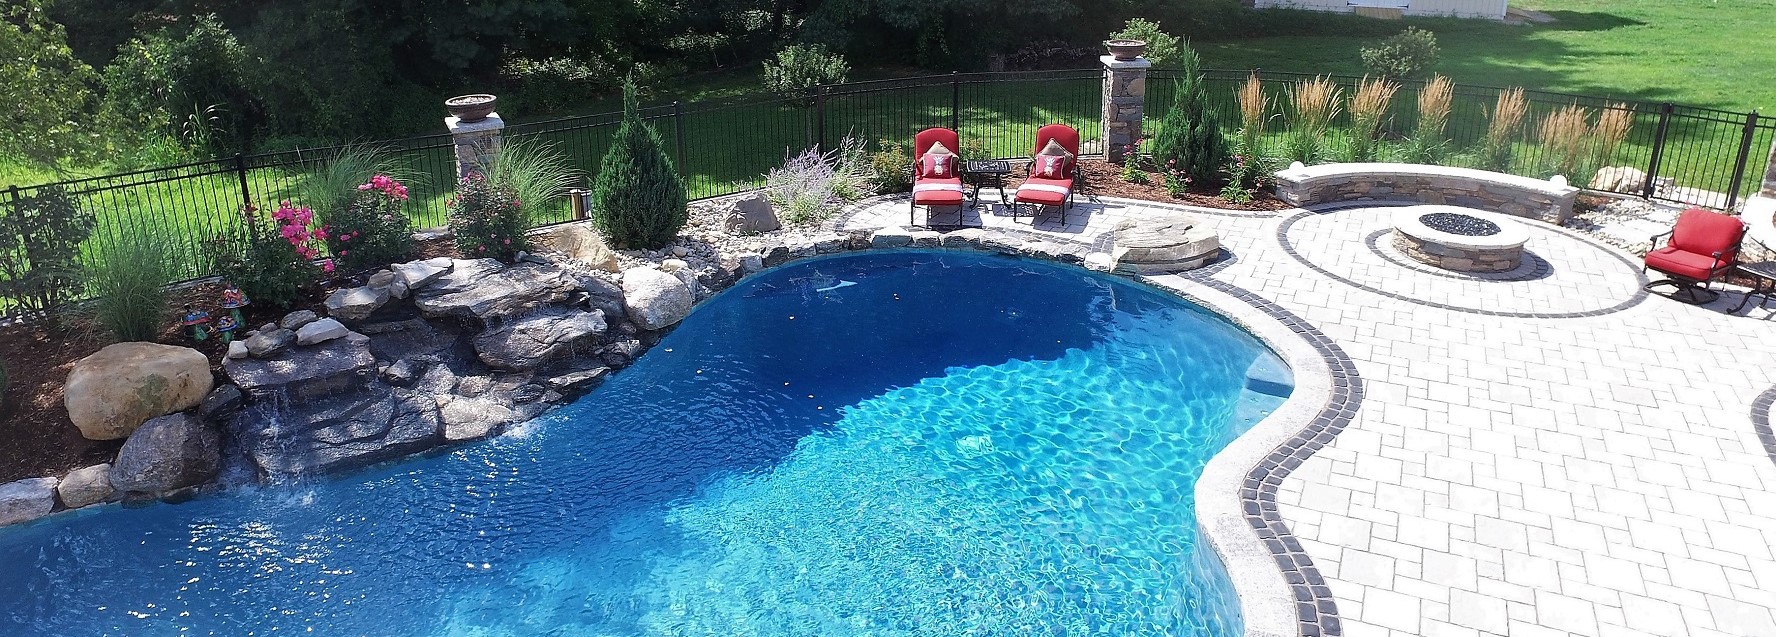 Aqua Pool & Patio gunite swimming pool construction in Connecticut showing pool with patio and seating area